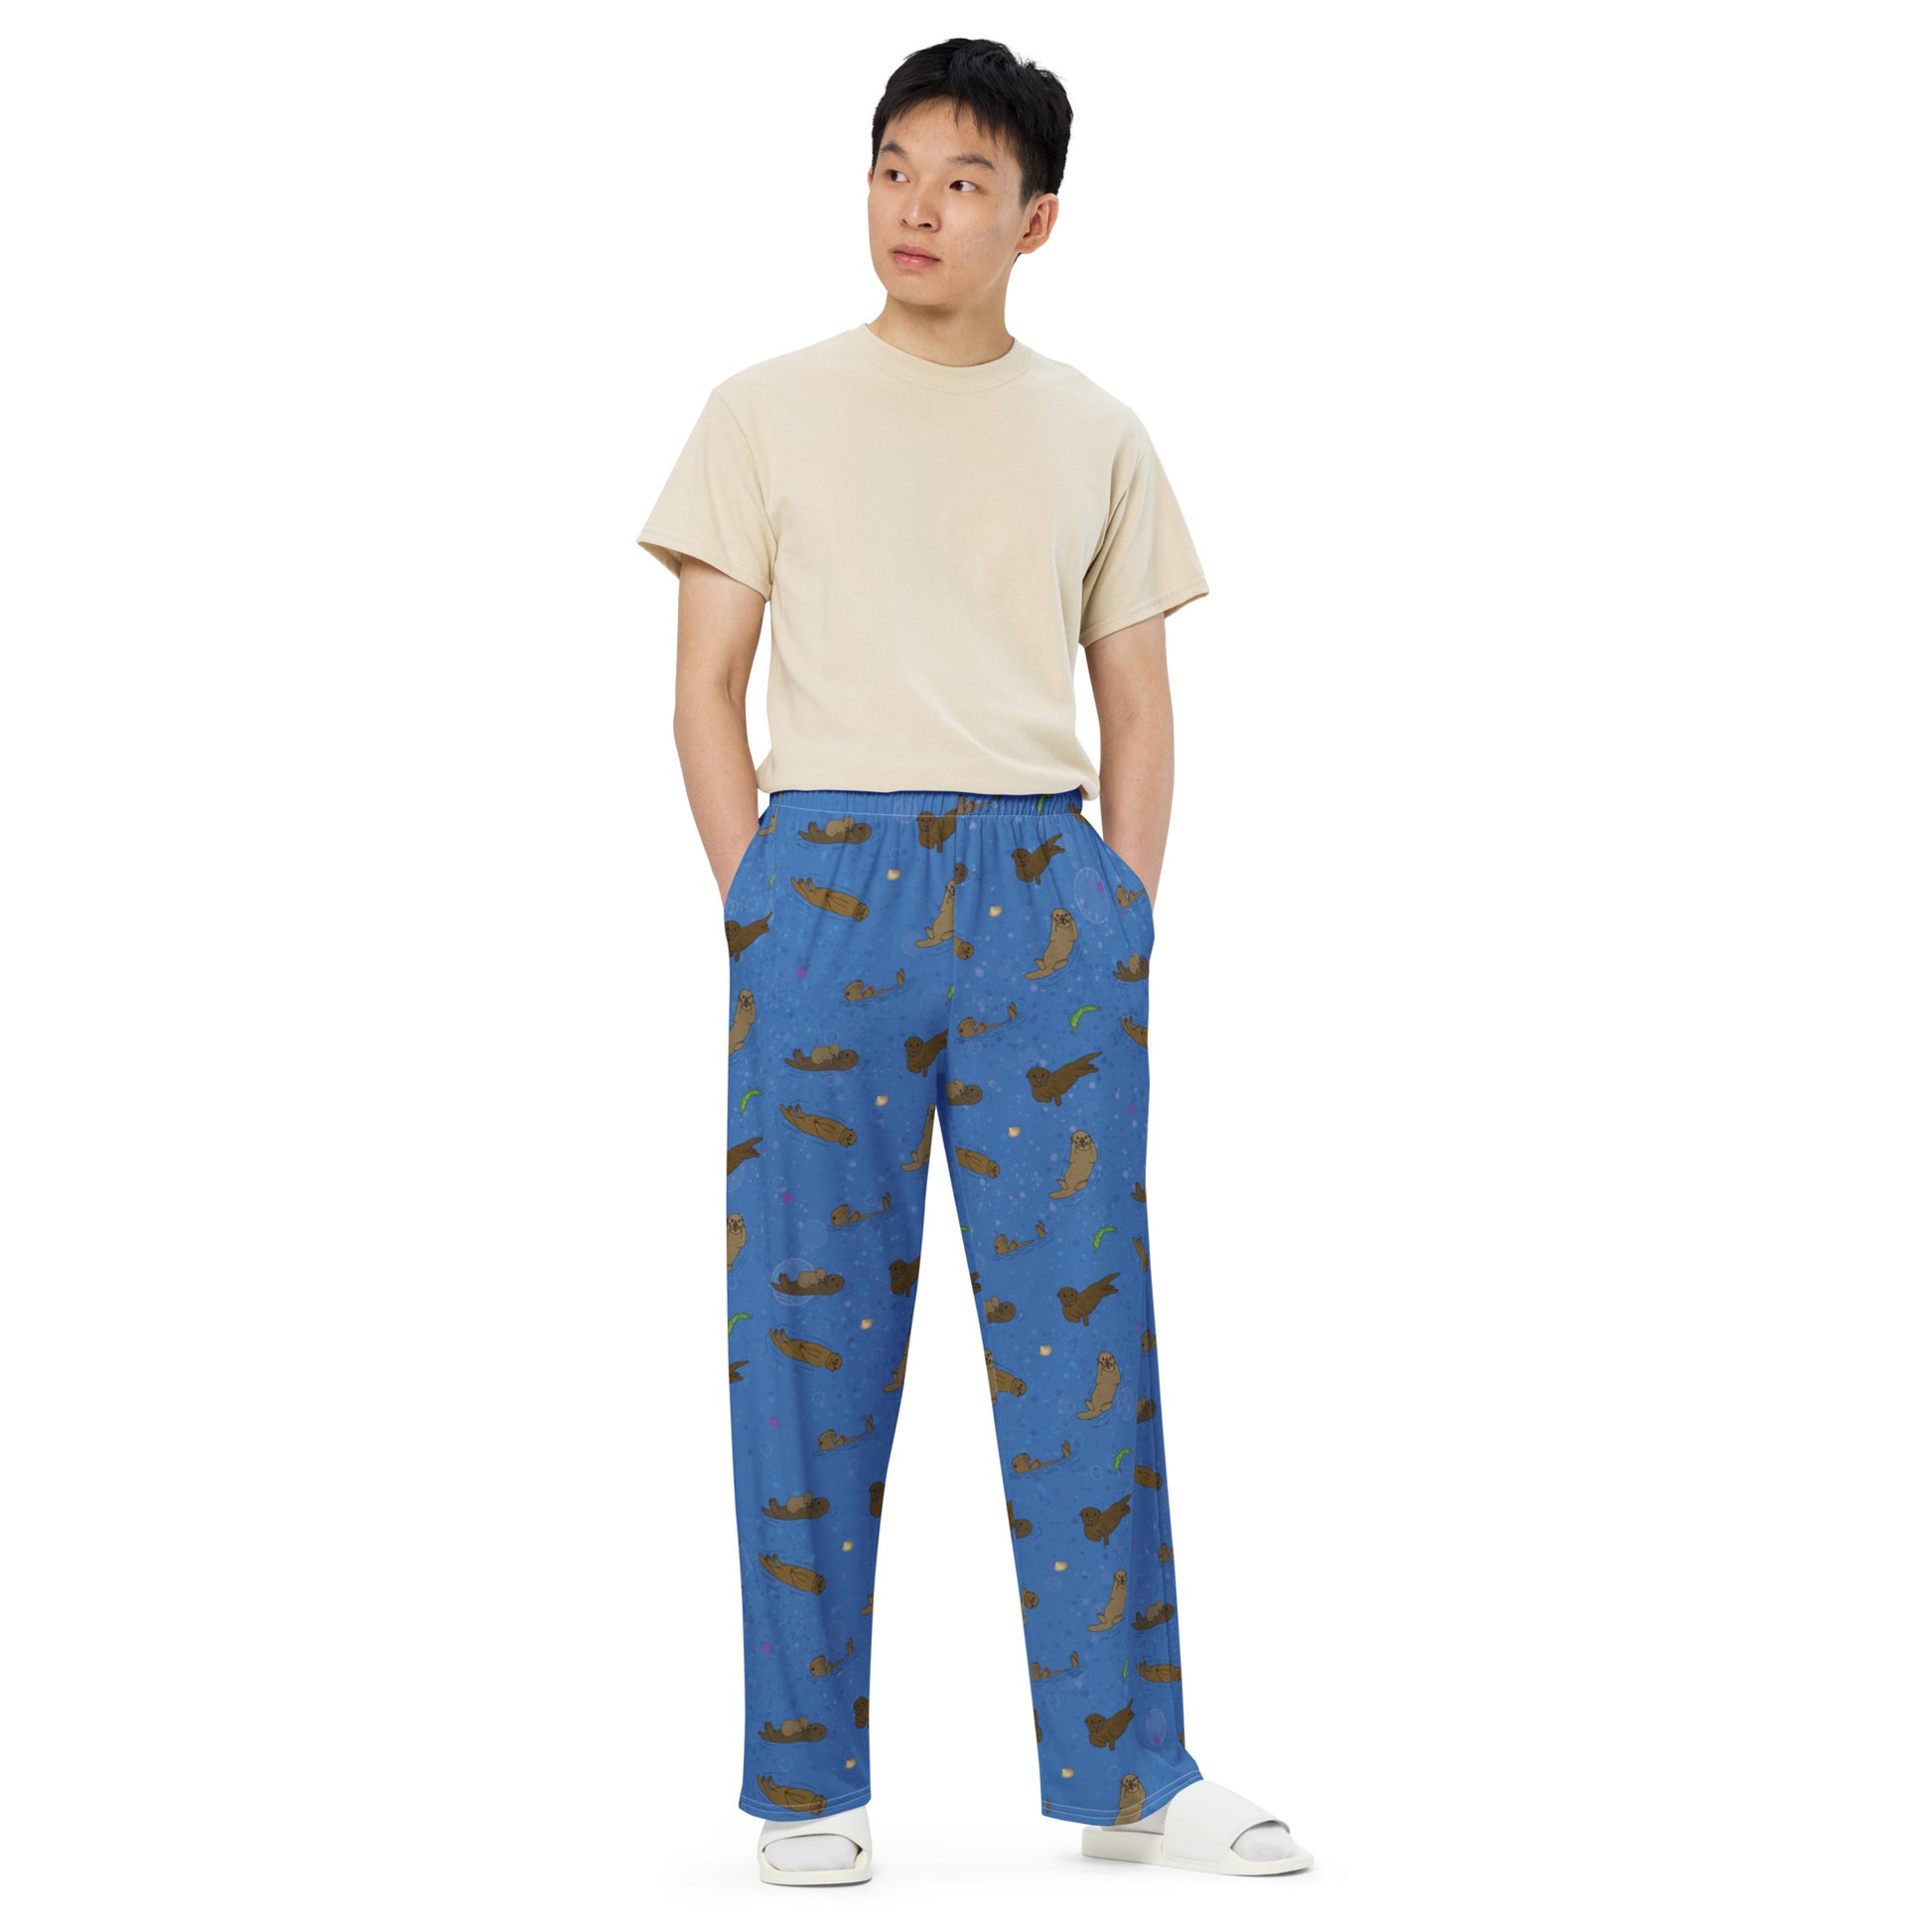 Unisex wide leg pants with elastic waistband, white drawstring and side pockets. Features a patterned design of sea otters, shells, seaweed and sea urchins on an ocean blue background. Shown on male model.